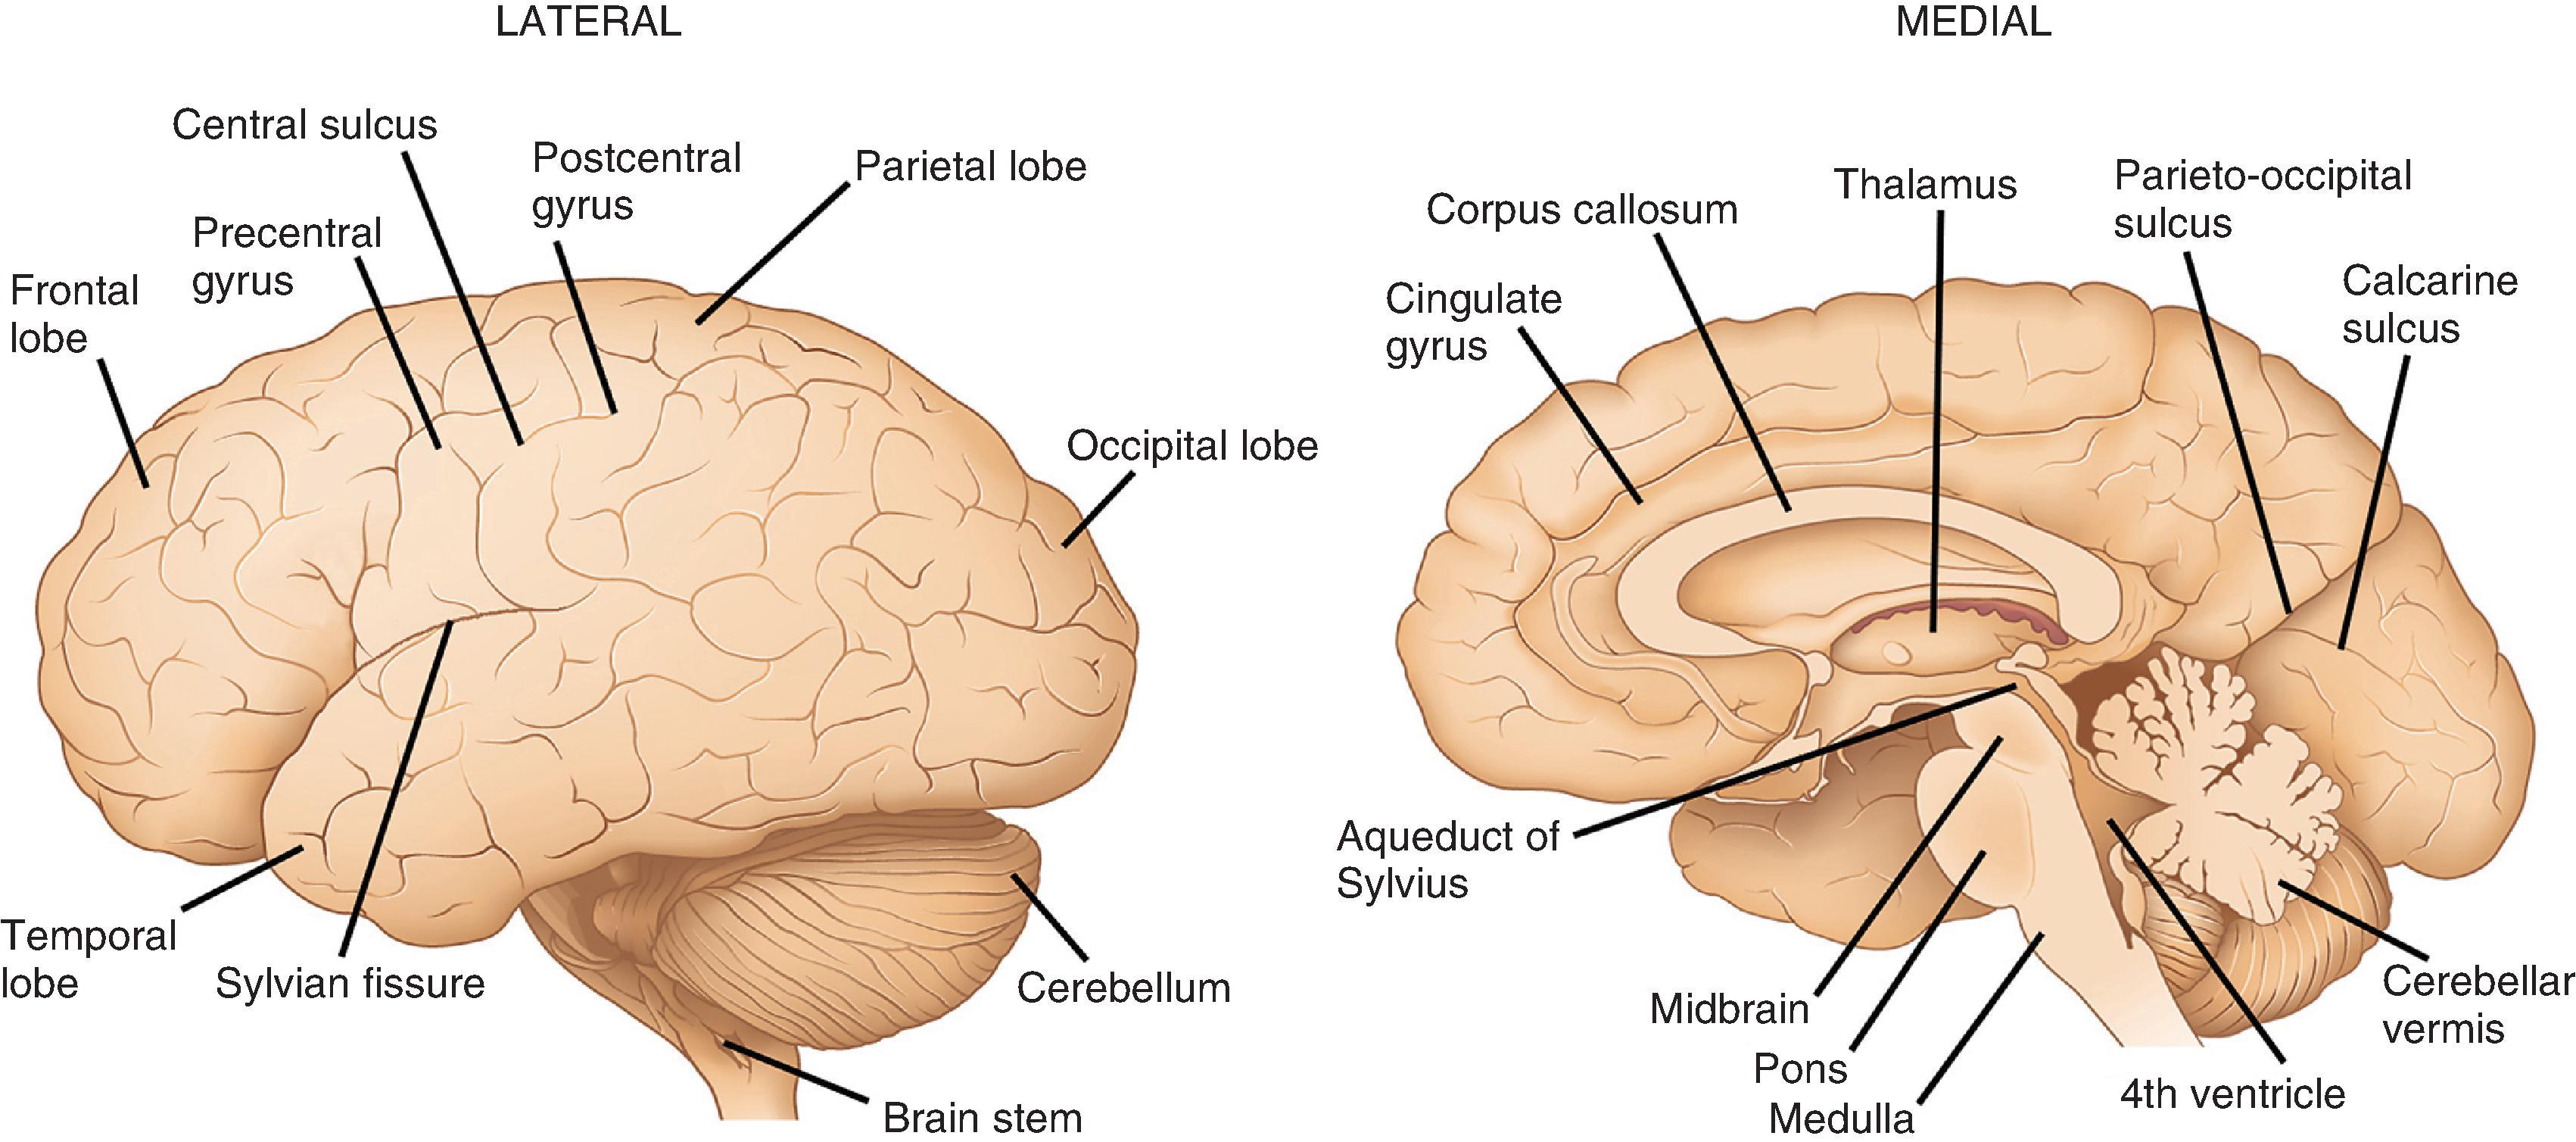 FIGure 1.2, Lateral and medial view of the brain surfaces.